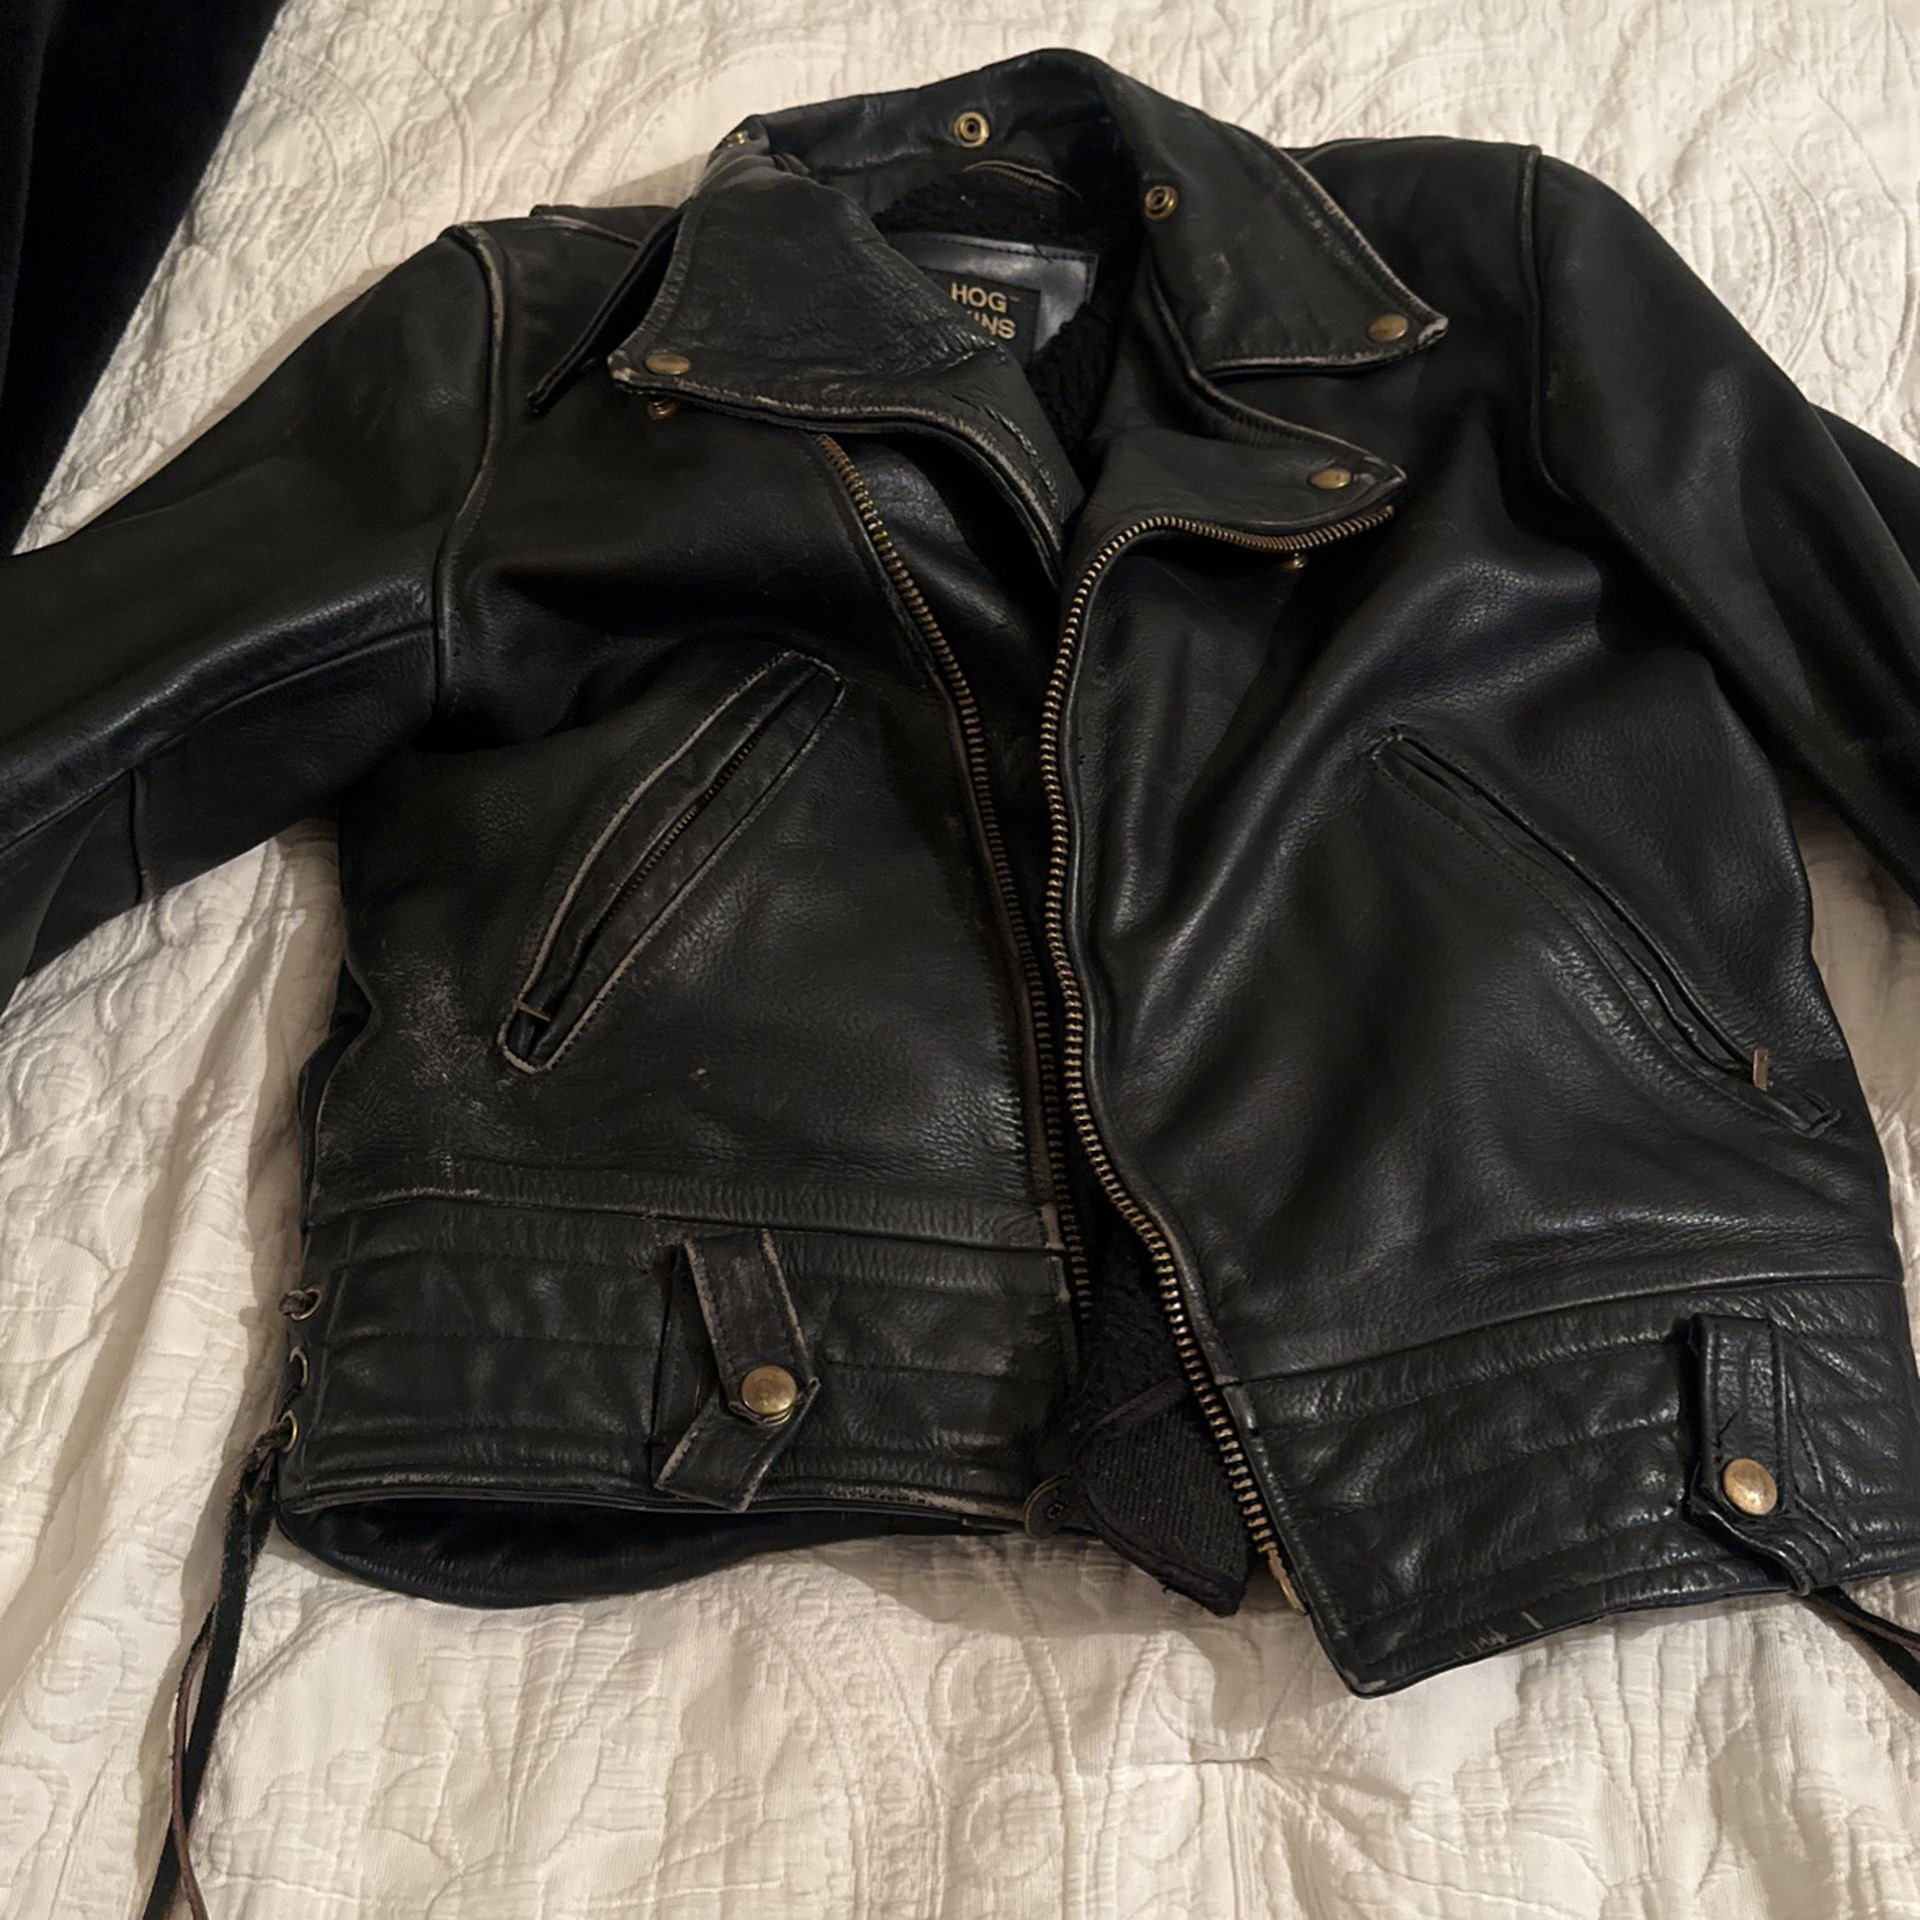 Vintage 1980’s Leather Motorcycle Jacket for Sale in Alhambra, CA - OfferUp